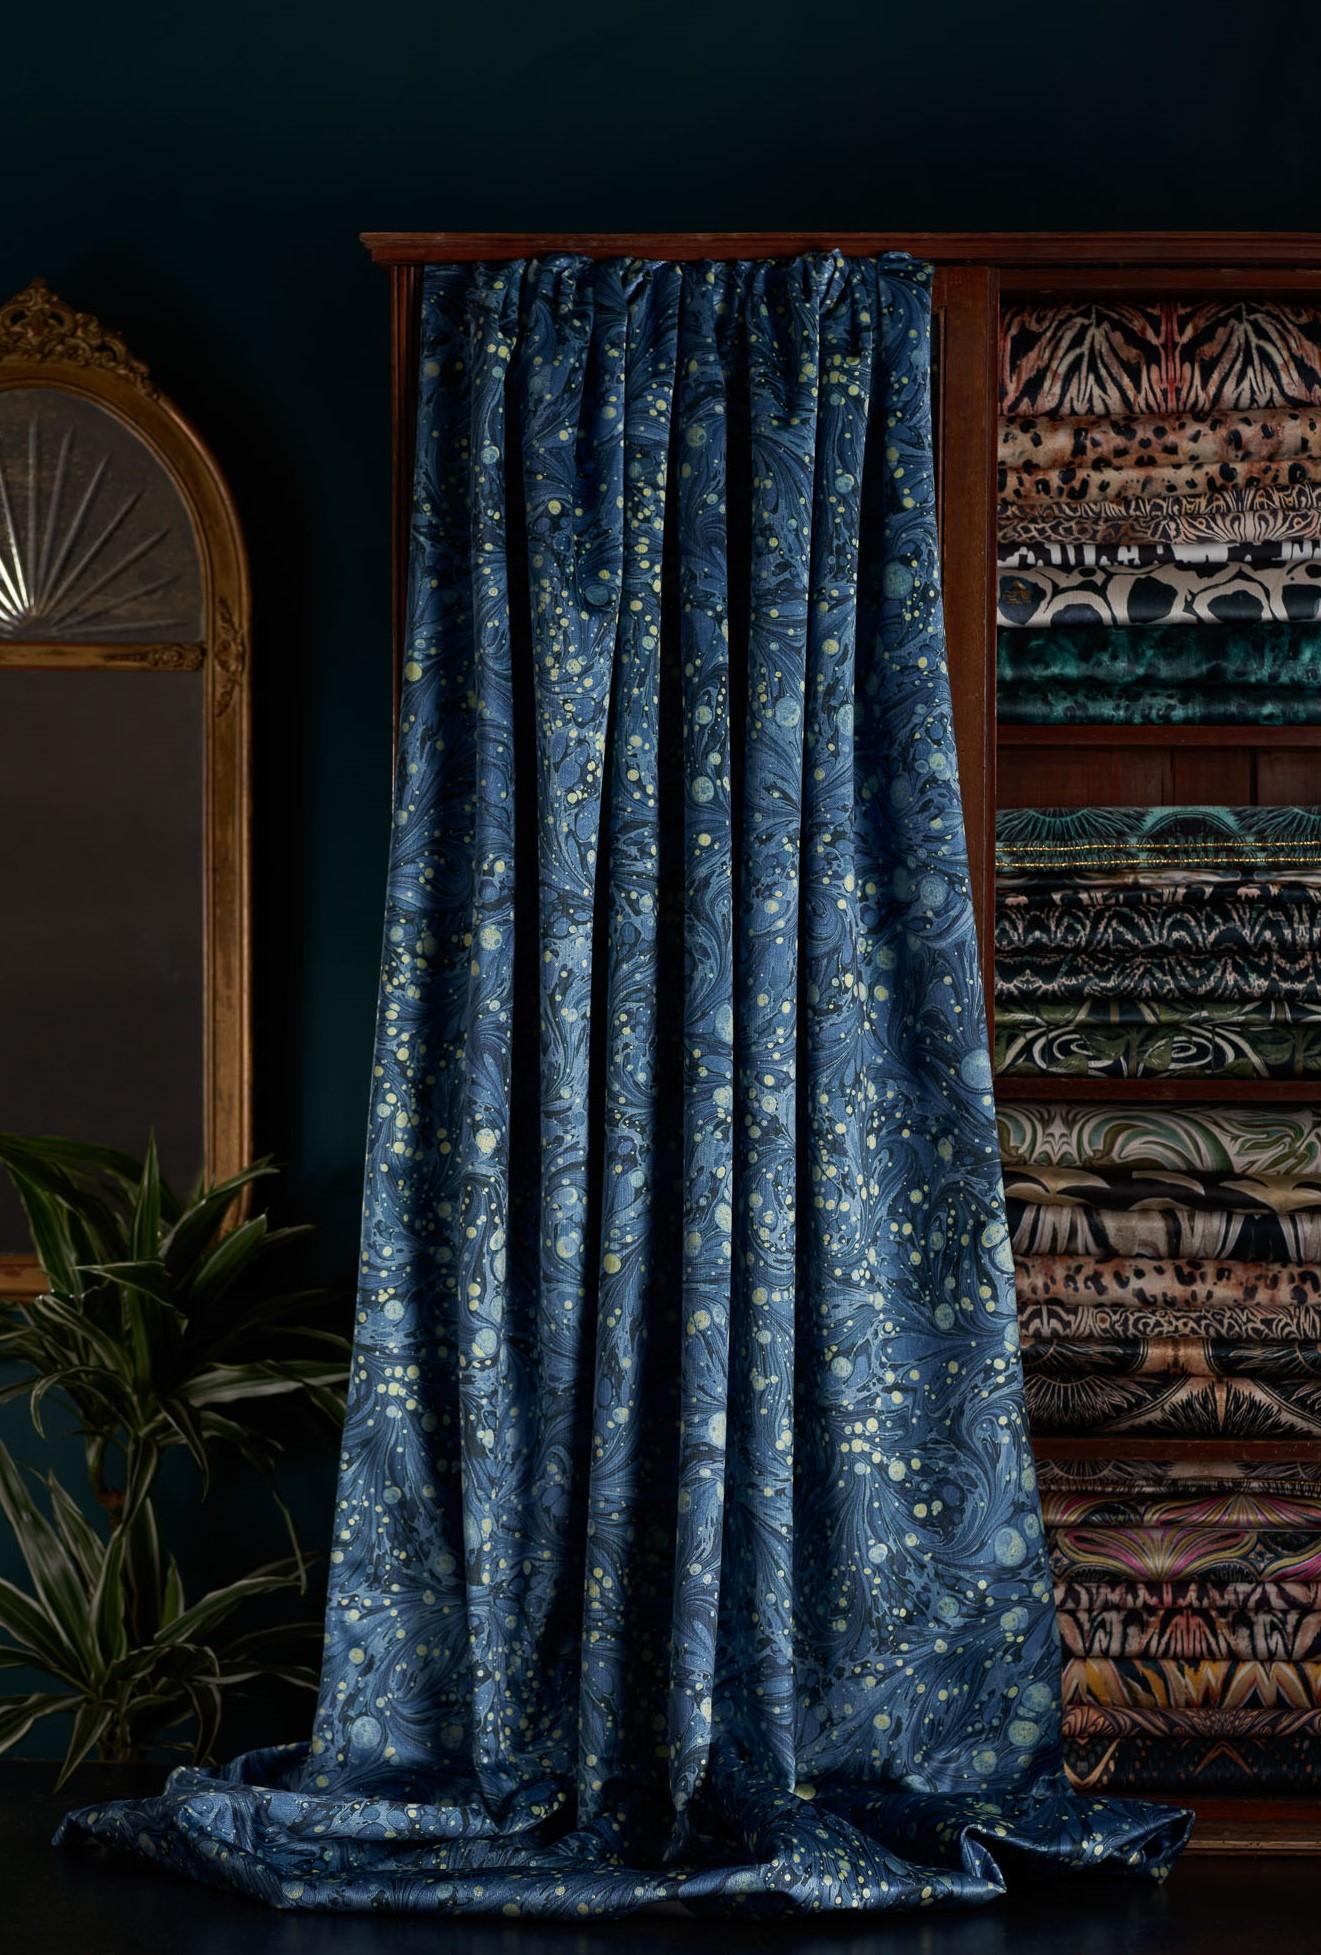 Meet our beautiful swirling blue marbled design – named Starry Night of course for its Van Gogh-like allusions. Created by insanely talented artist, Freya Scott, from Paperwilds.

This velvet is midweight, with a strong straight woven backing, so is